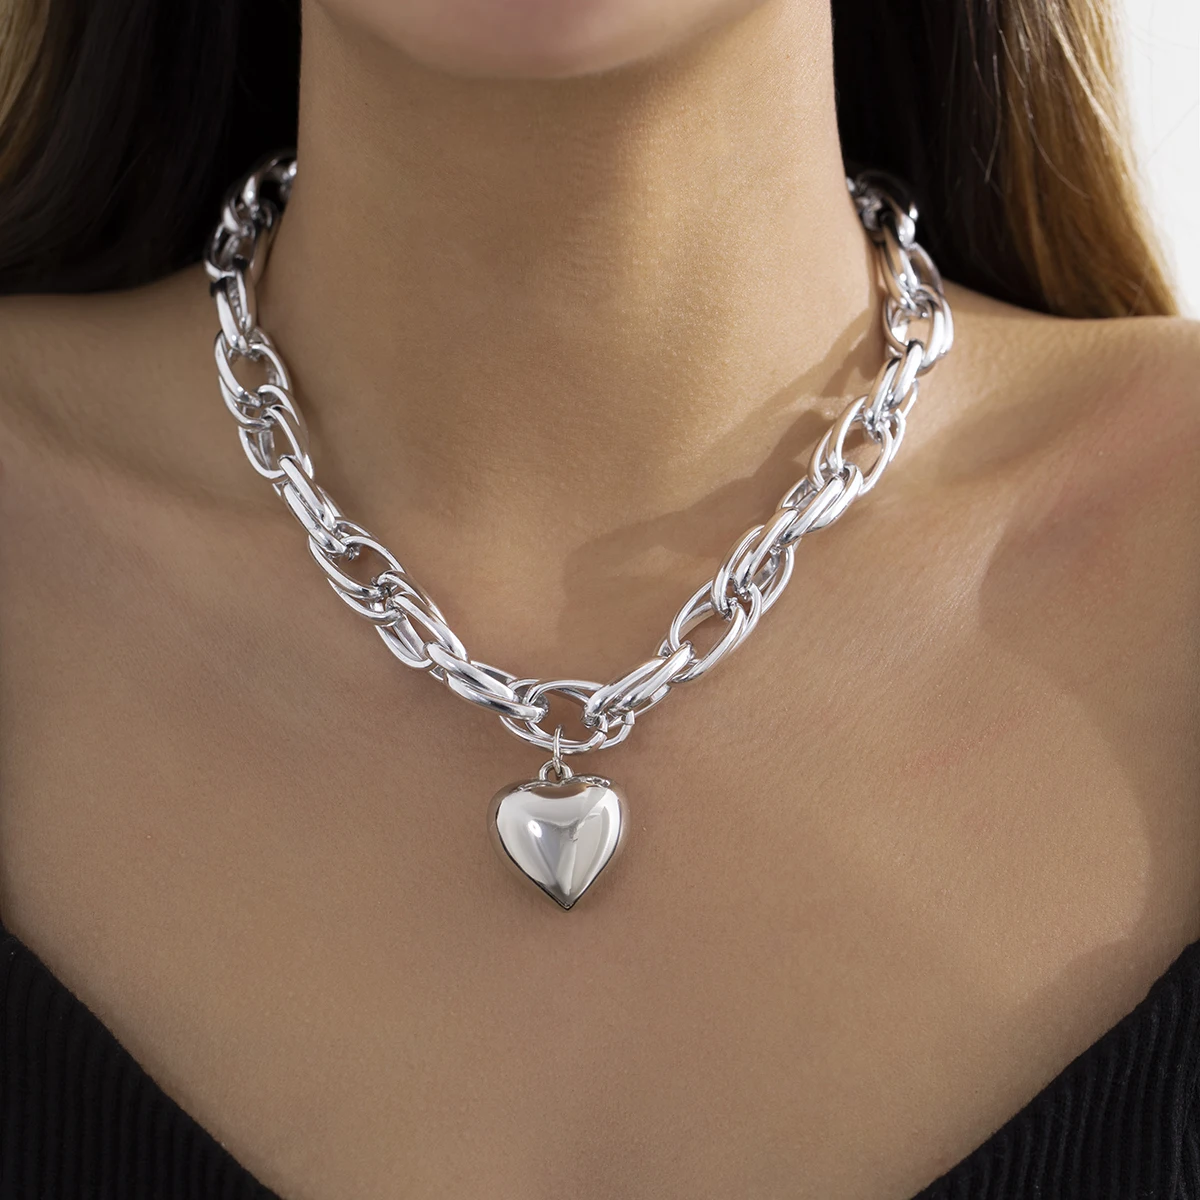 Hip Hop Thick Cross Chain With Heart Pendant Necklace for Women Chunky Short Choker Necklace Collar 2022 Fashion Jewelry on Neck